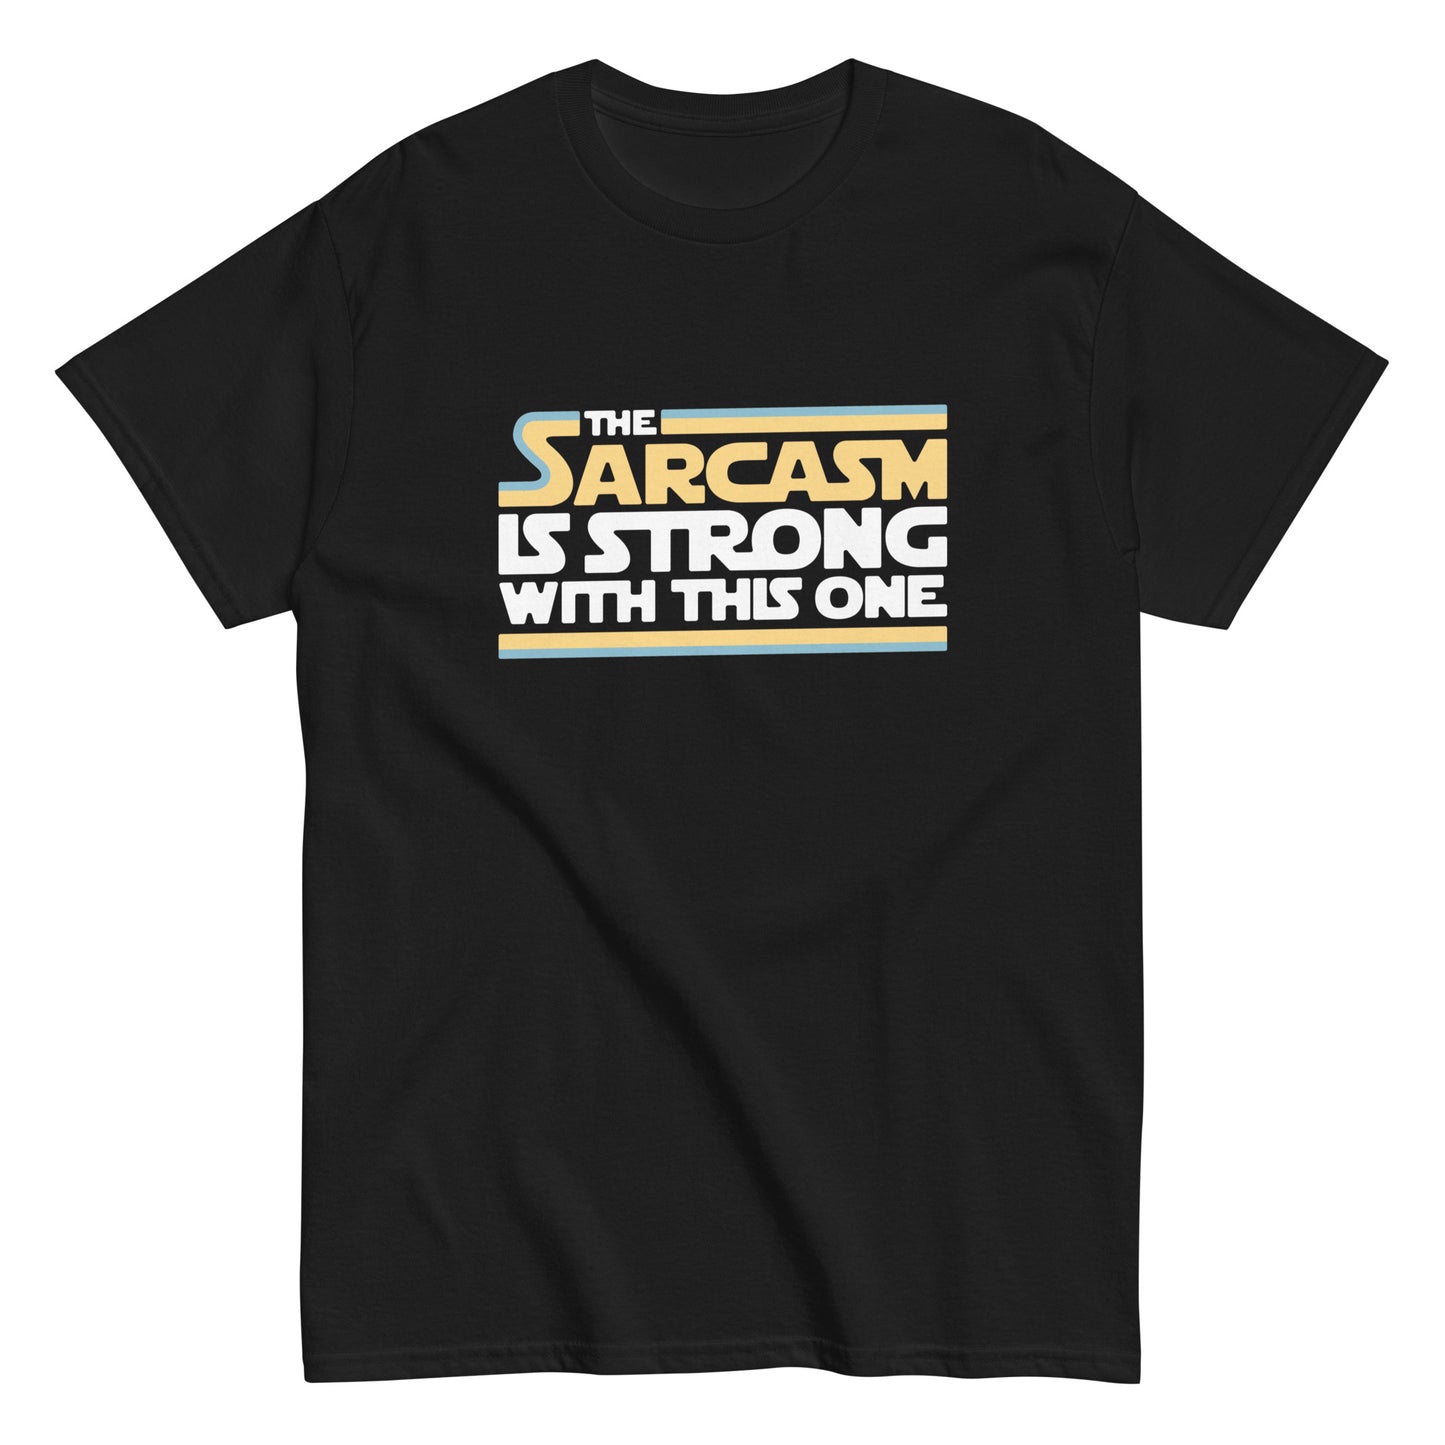 The Sarcasm Is Strong With This One Men's Classic Tee